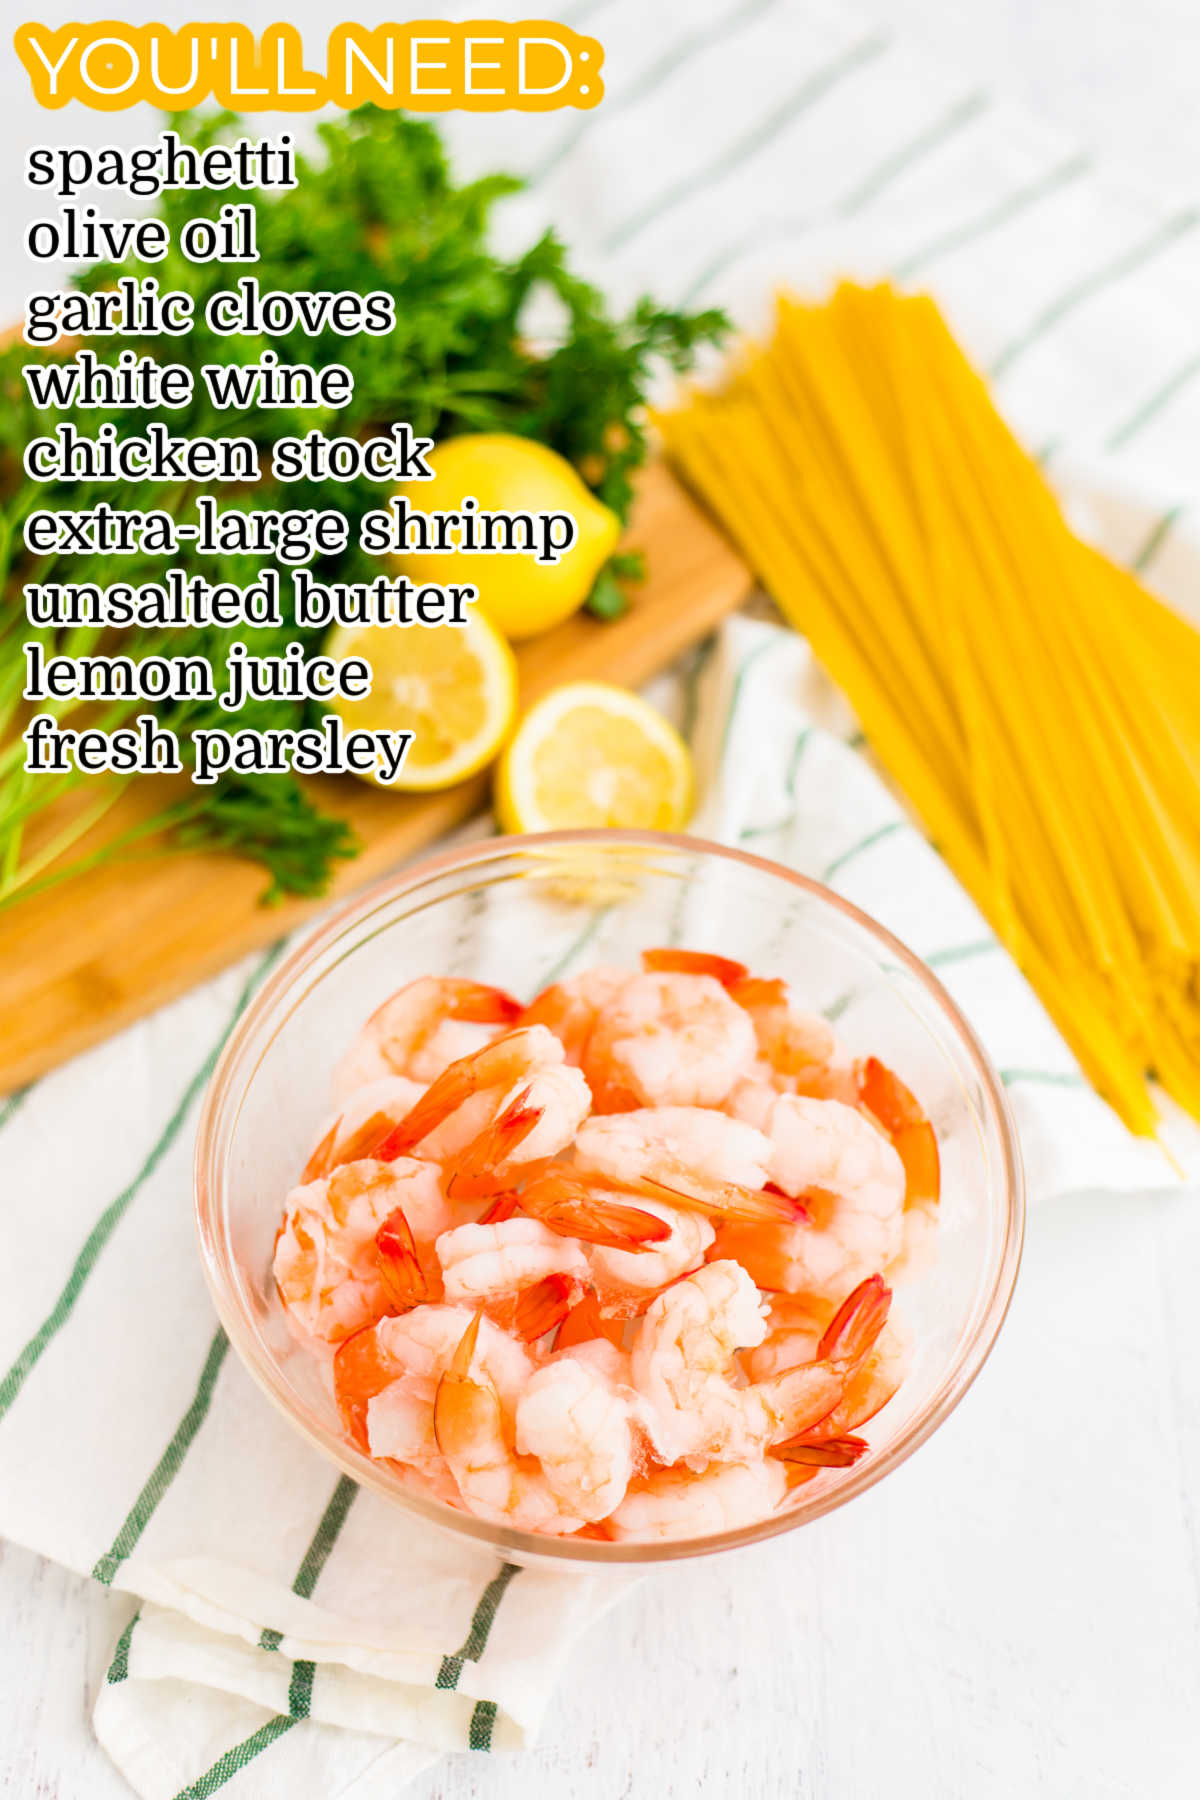 All of the ingredients needed to make Shrimp Scampi.